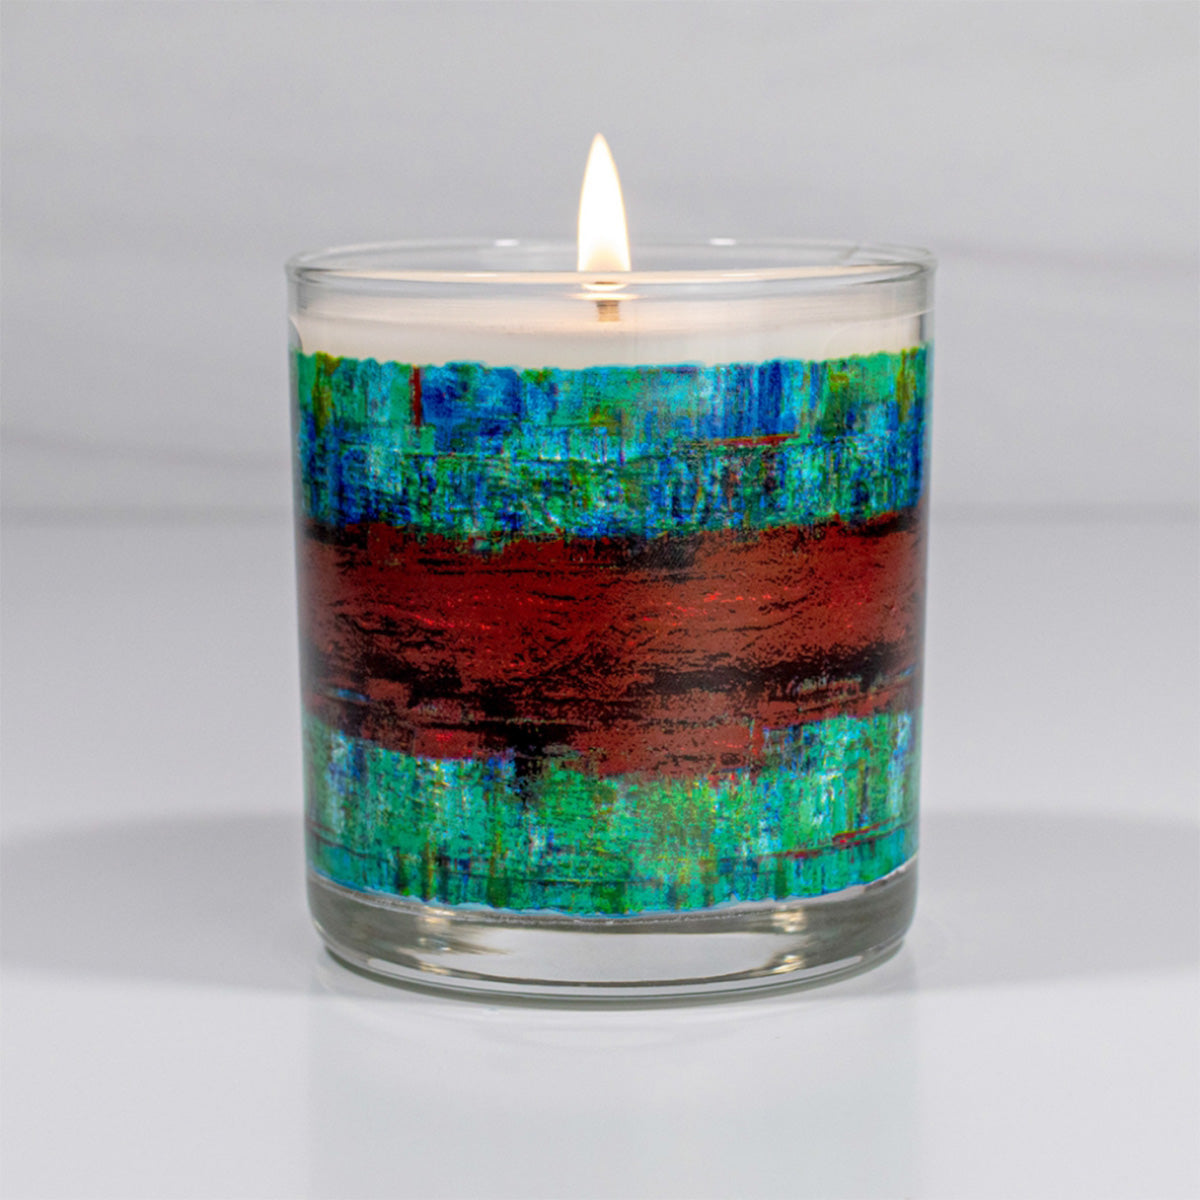 Ronnie Queenan Along The Path Scented Jar Candle Artistscent